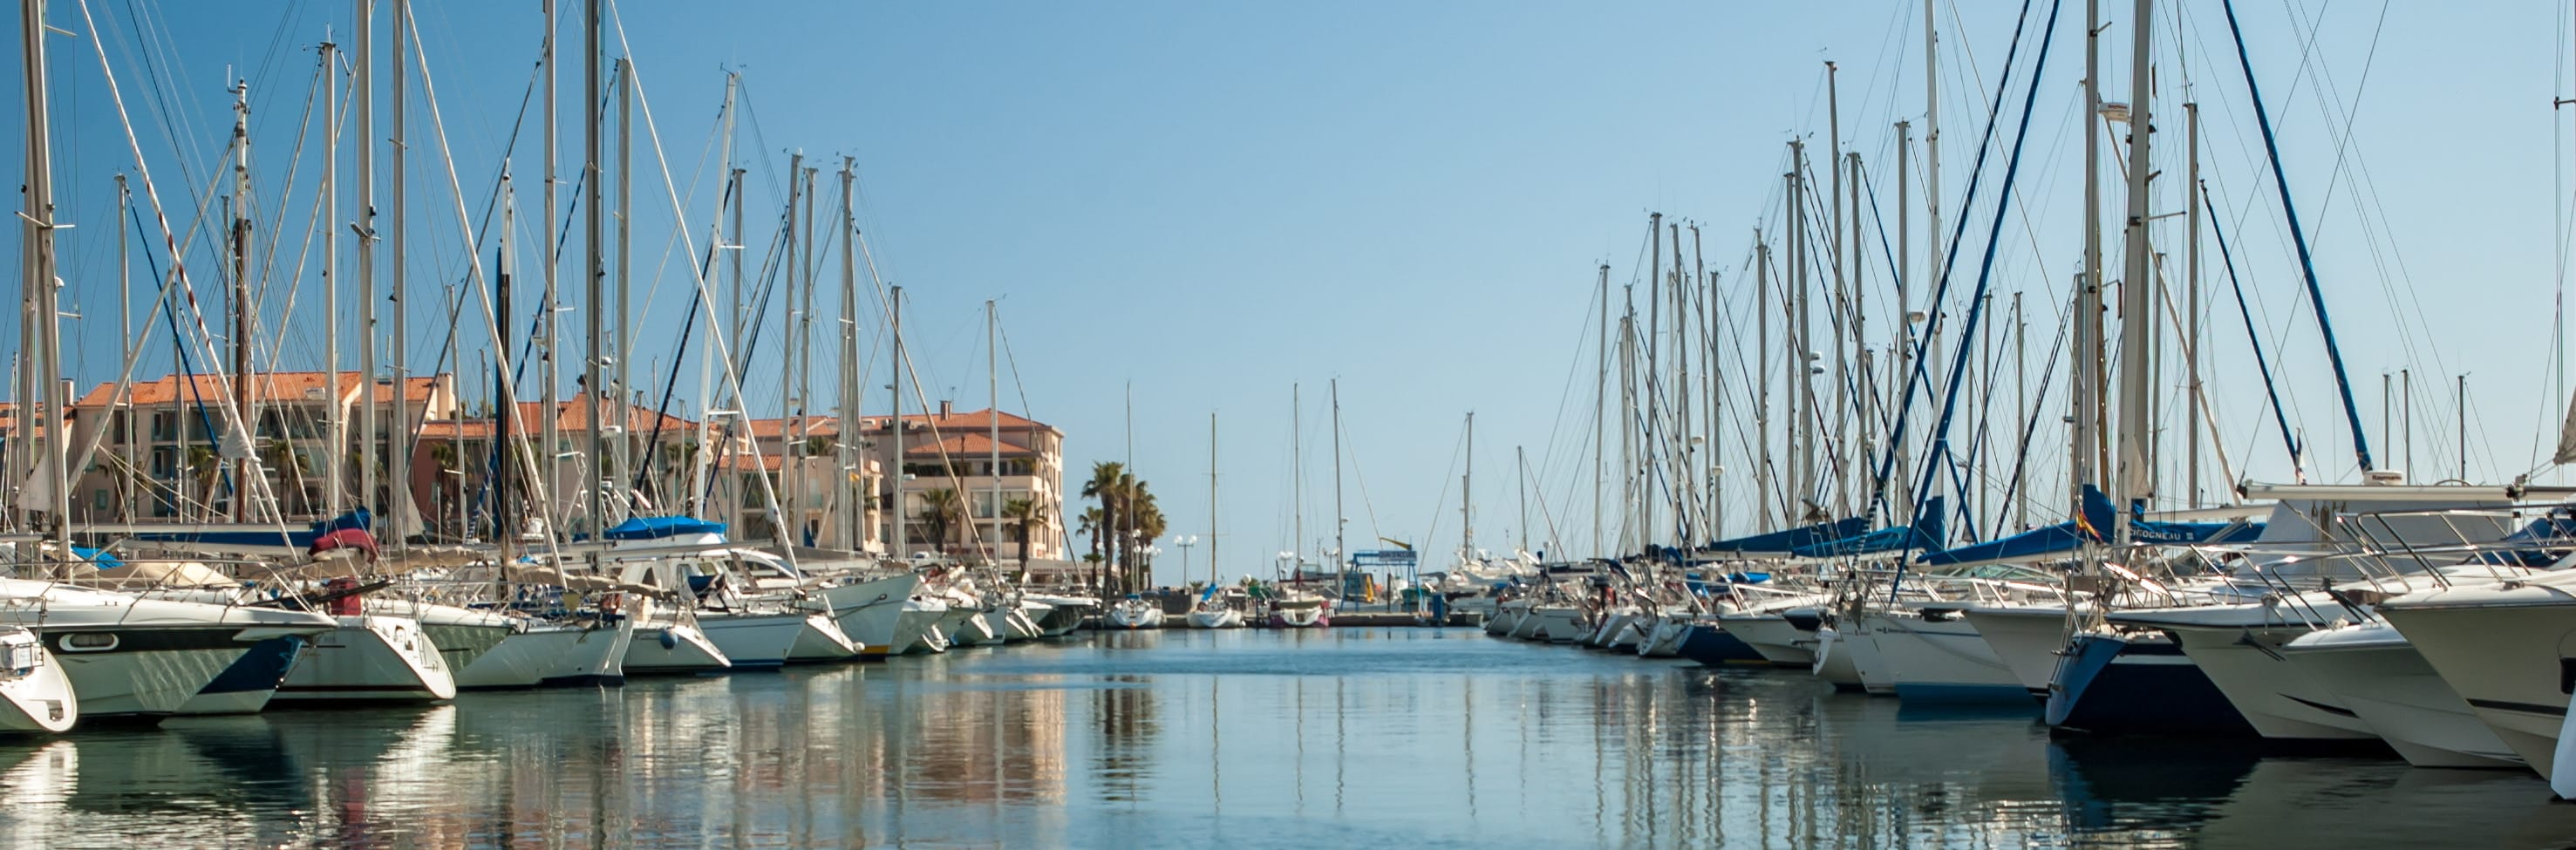 Boats in Argeles Port